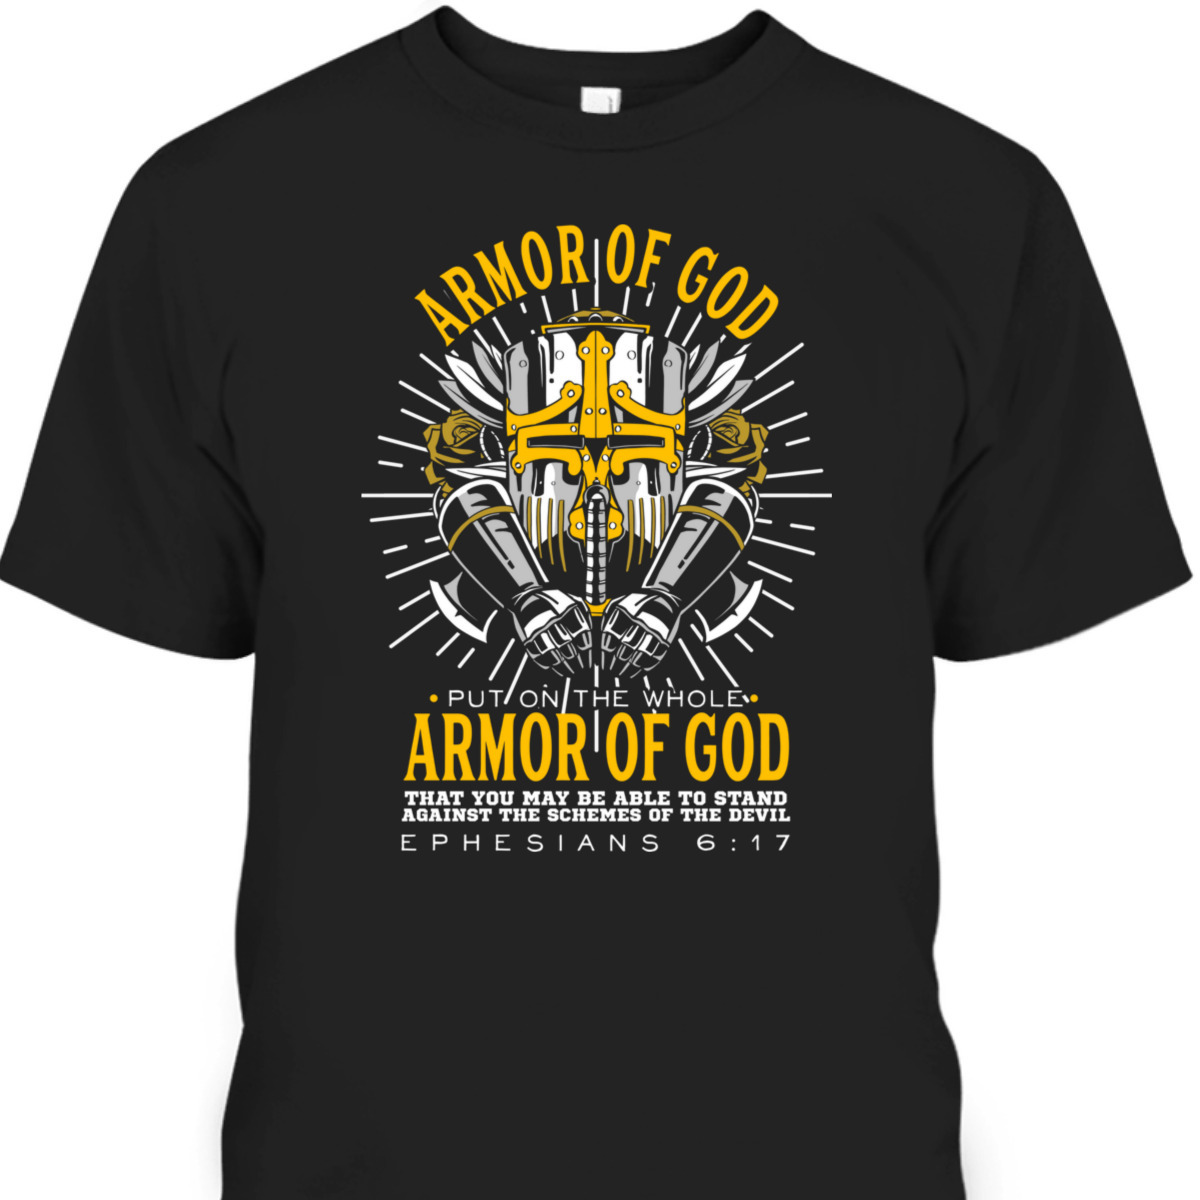 Armor Of God Bible Verse T-Shirt For Religious Christian Faith Believers